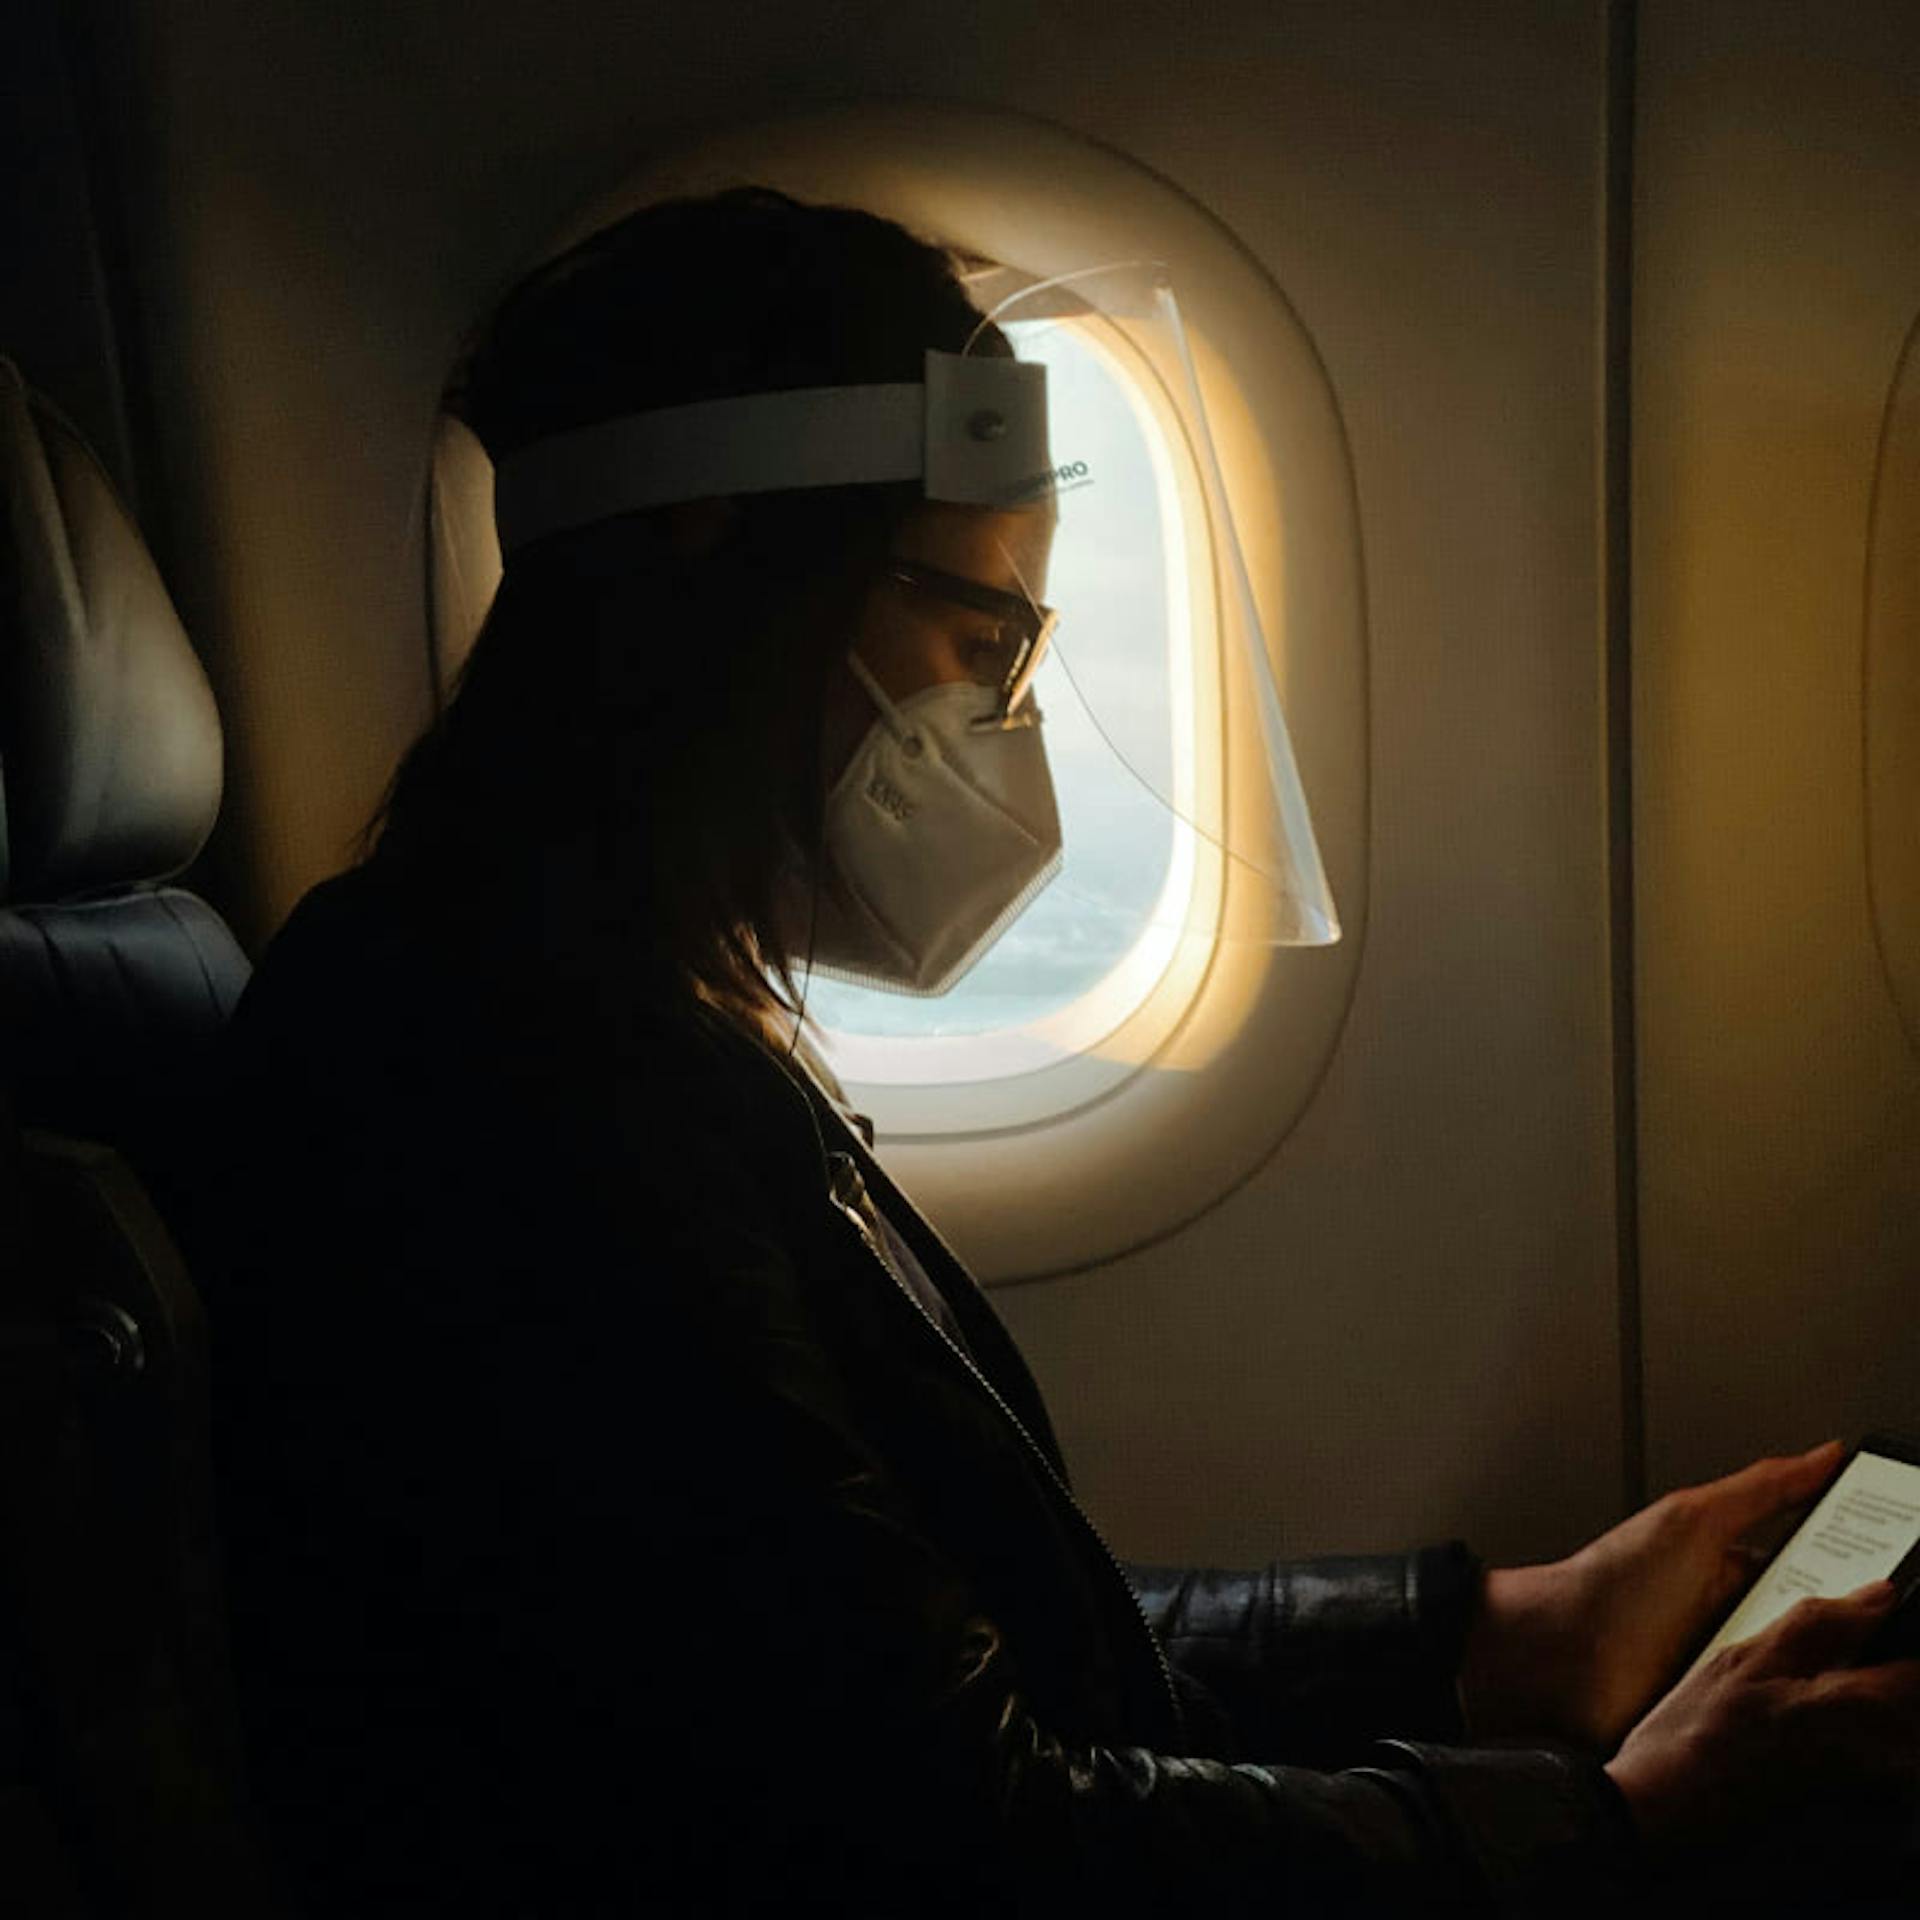 A passenger following the FAA rules by wearing a face mask and shield during their flight.